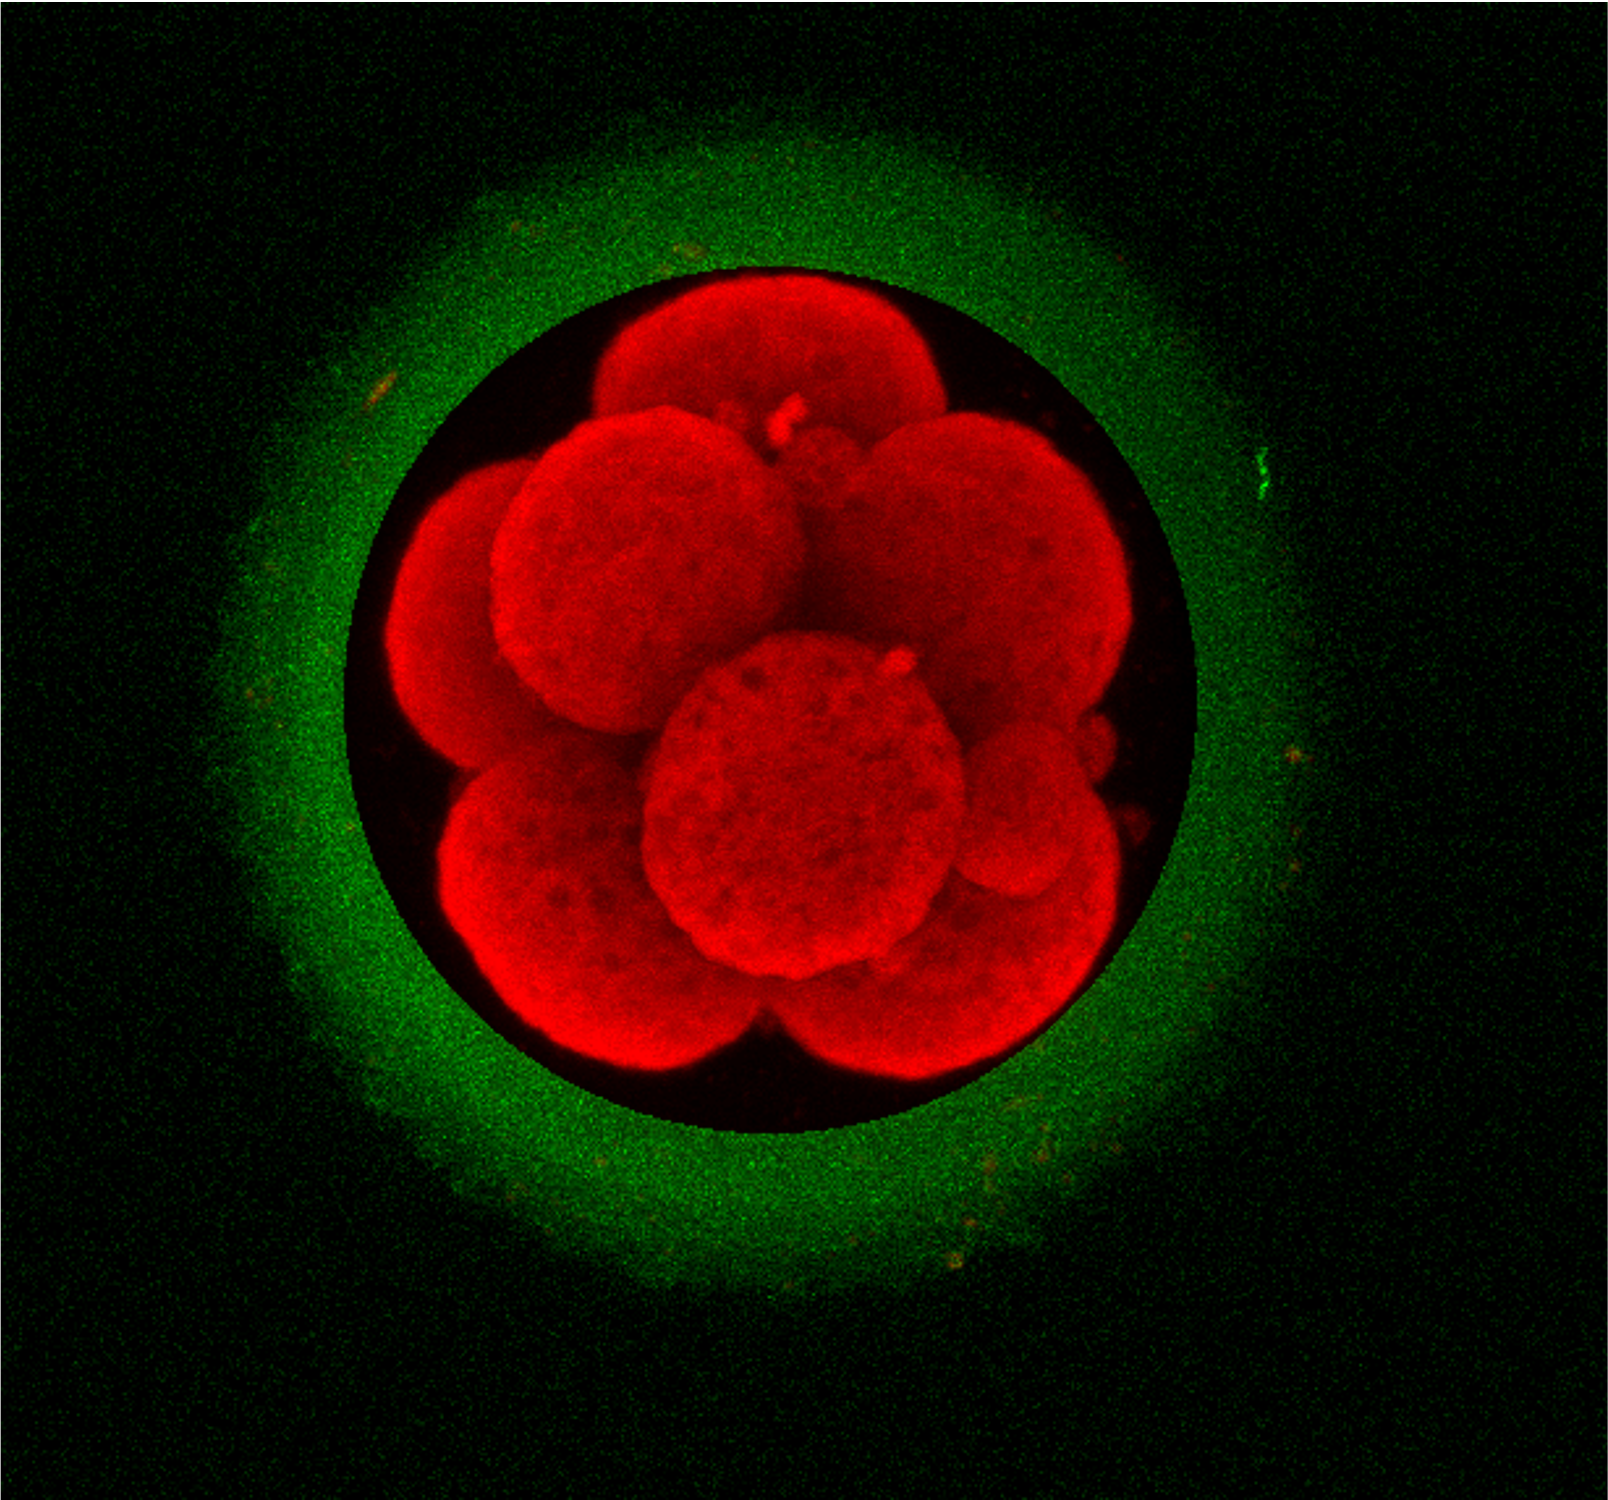 A donated human embryo (in red)